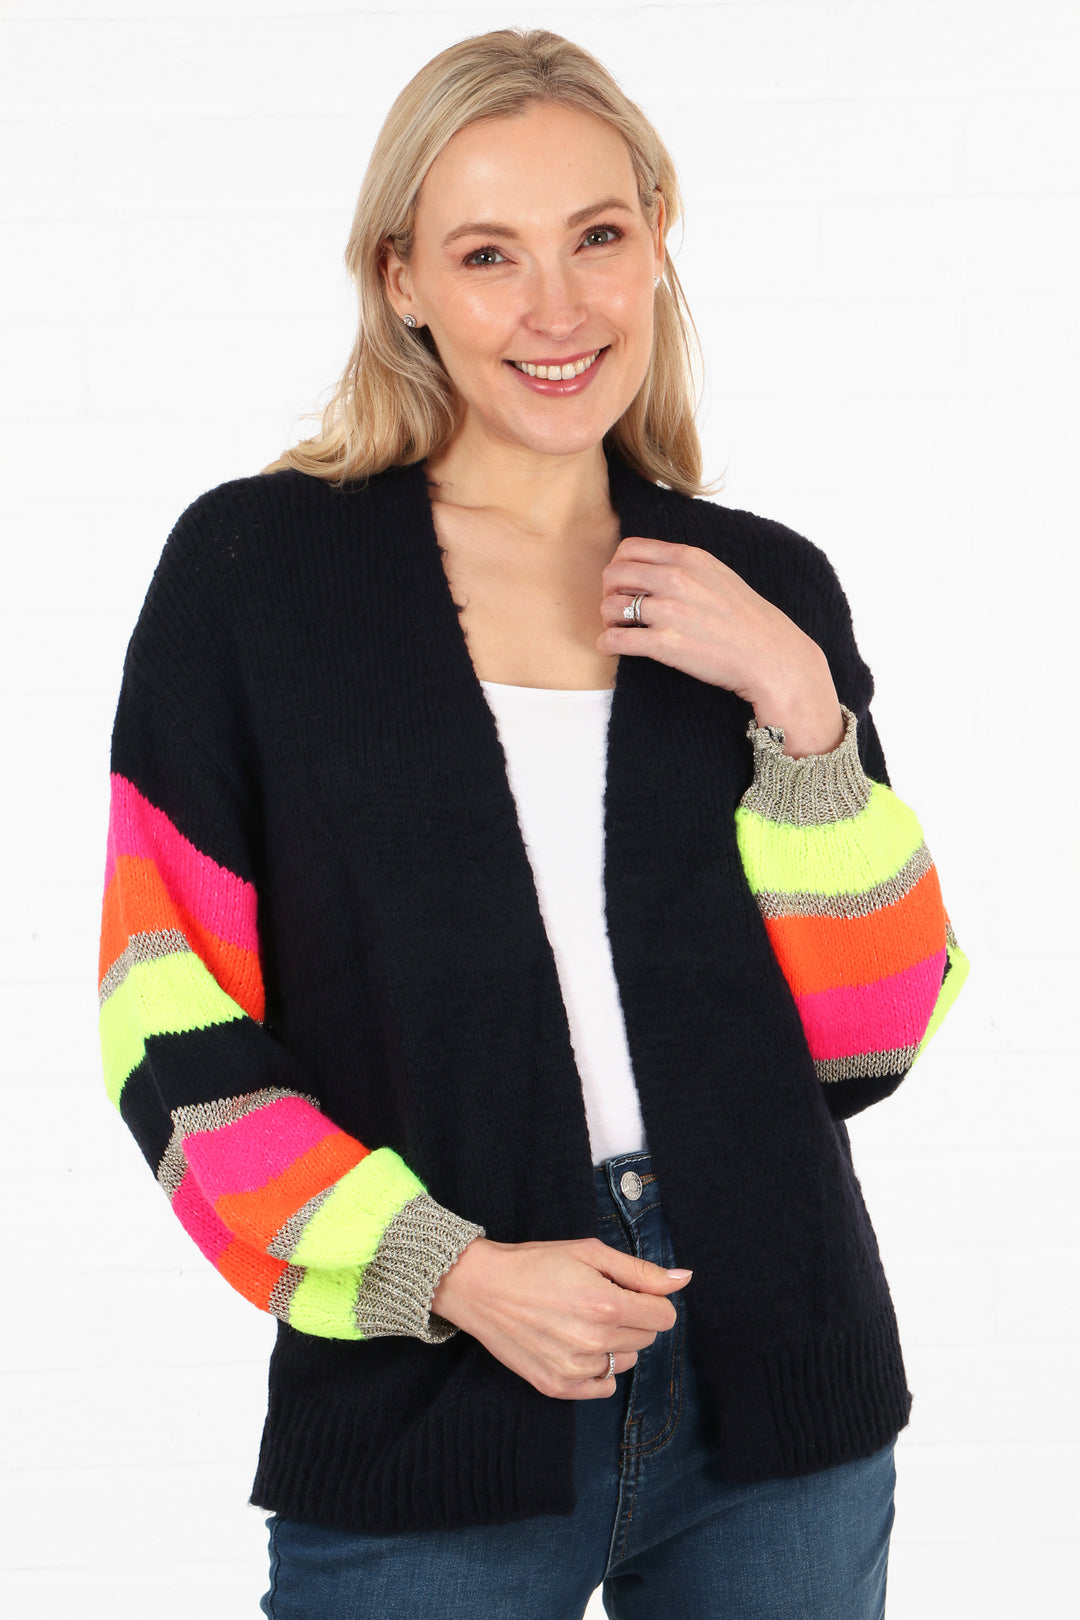 model wearing a navy blue open front cardigan with colourful stiped sleeves. The sleeves are neon yellow, pink, orange and gold glitter striped